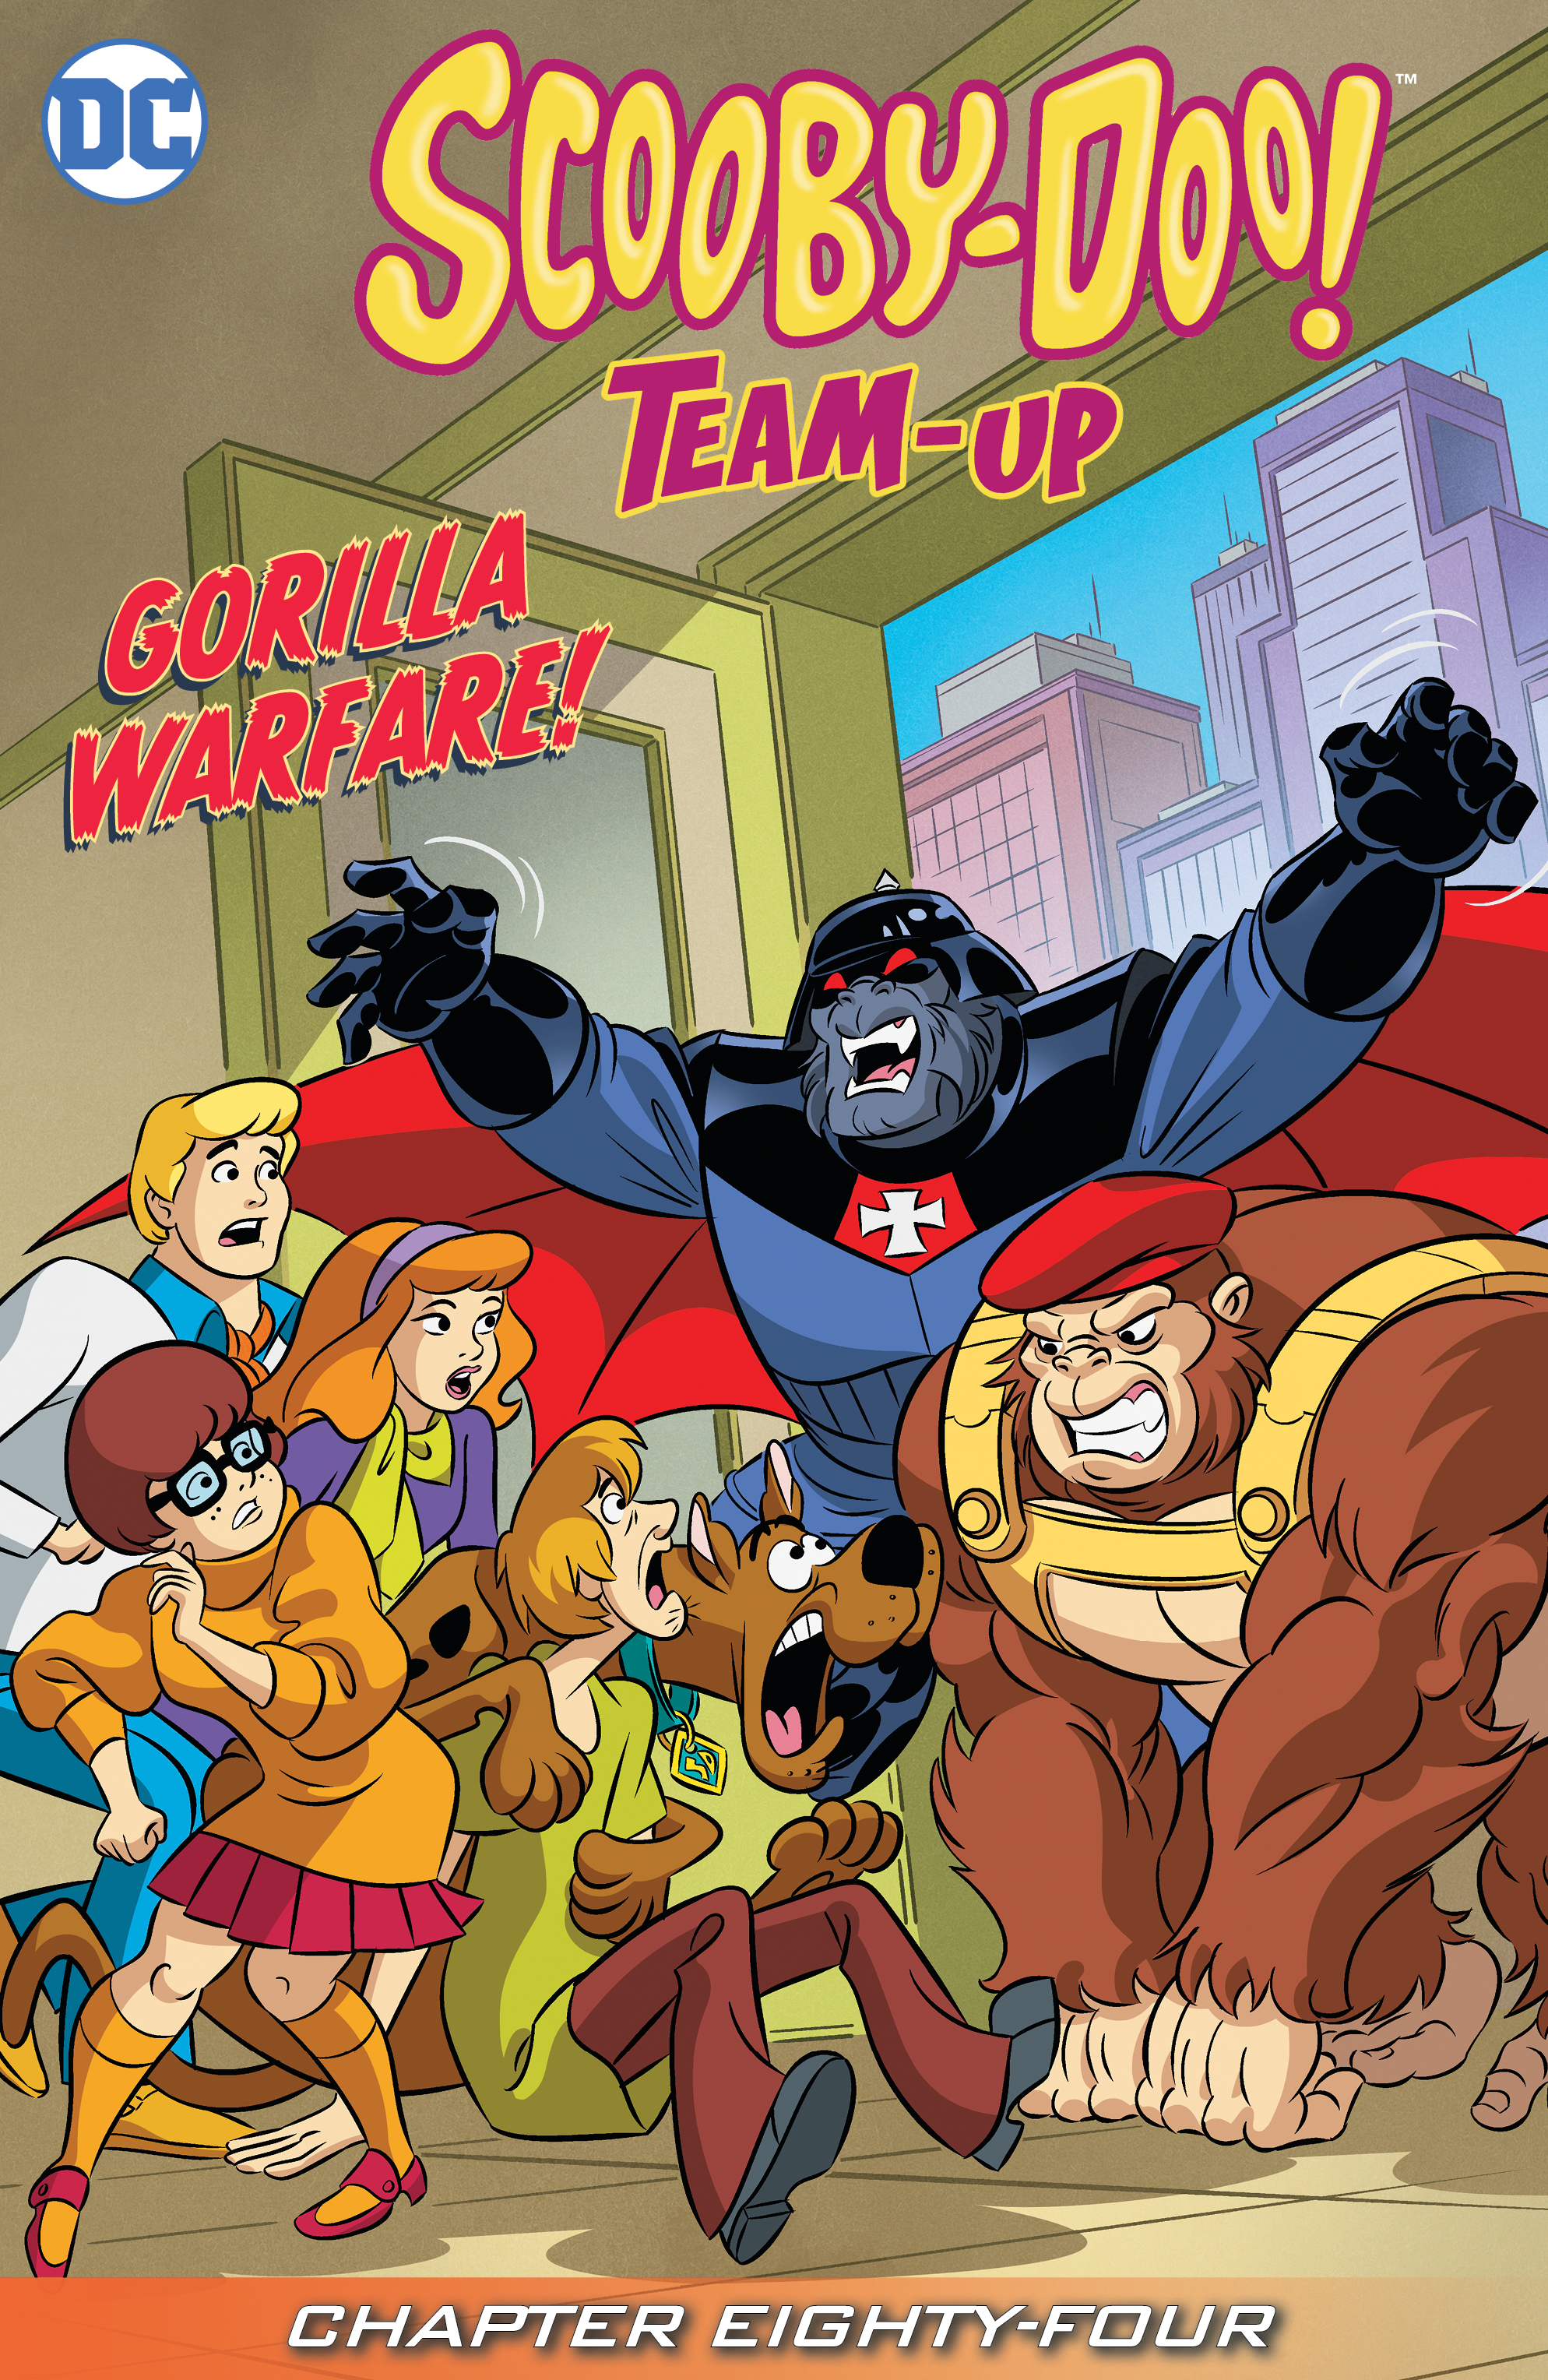 Scooby-Doo Team-Up #84 preview images